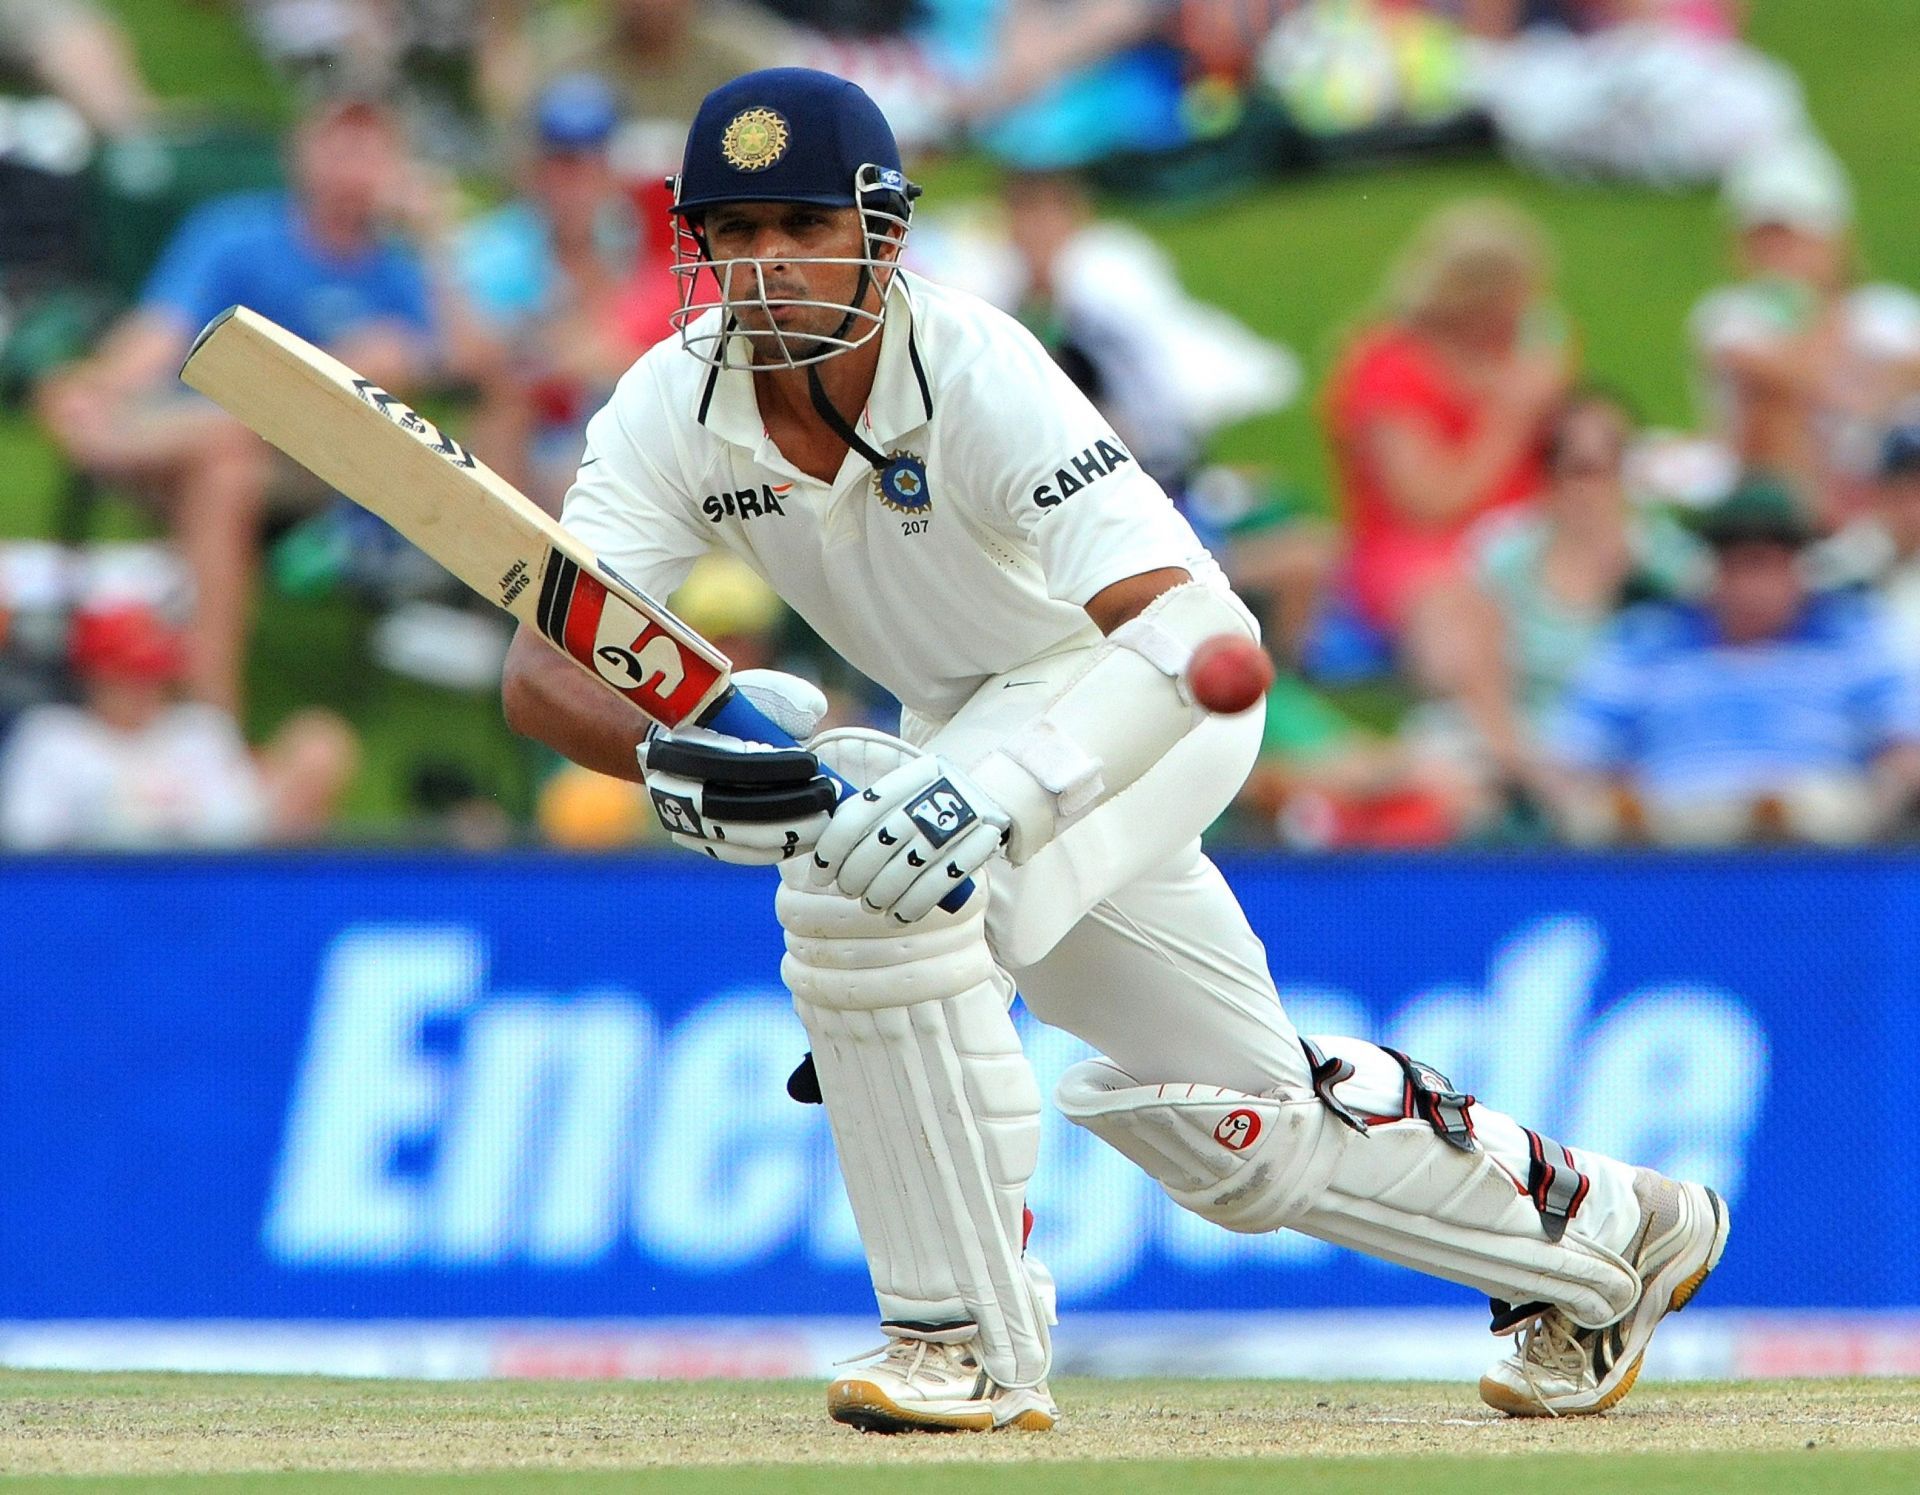 Rahul Dravid scored his maiden Test hundred in South Africa. Pic: Getty Images